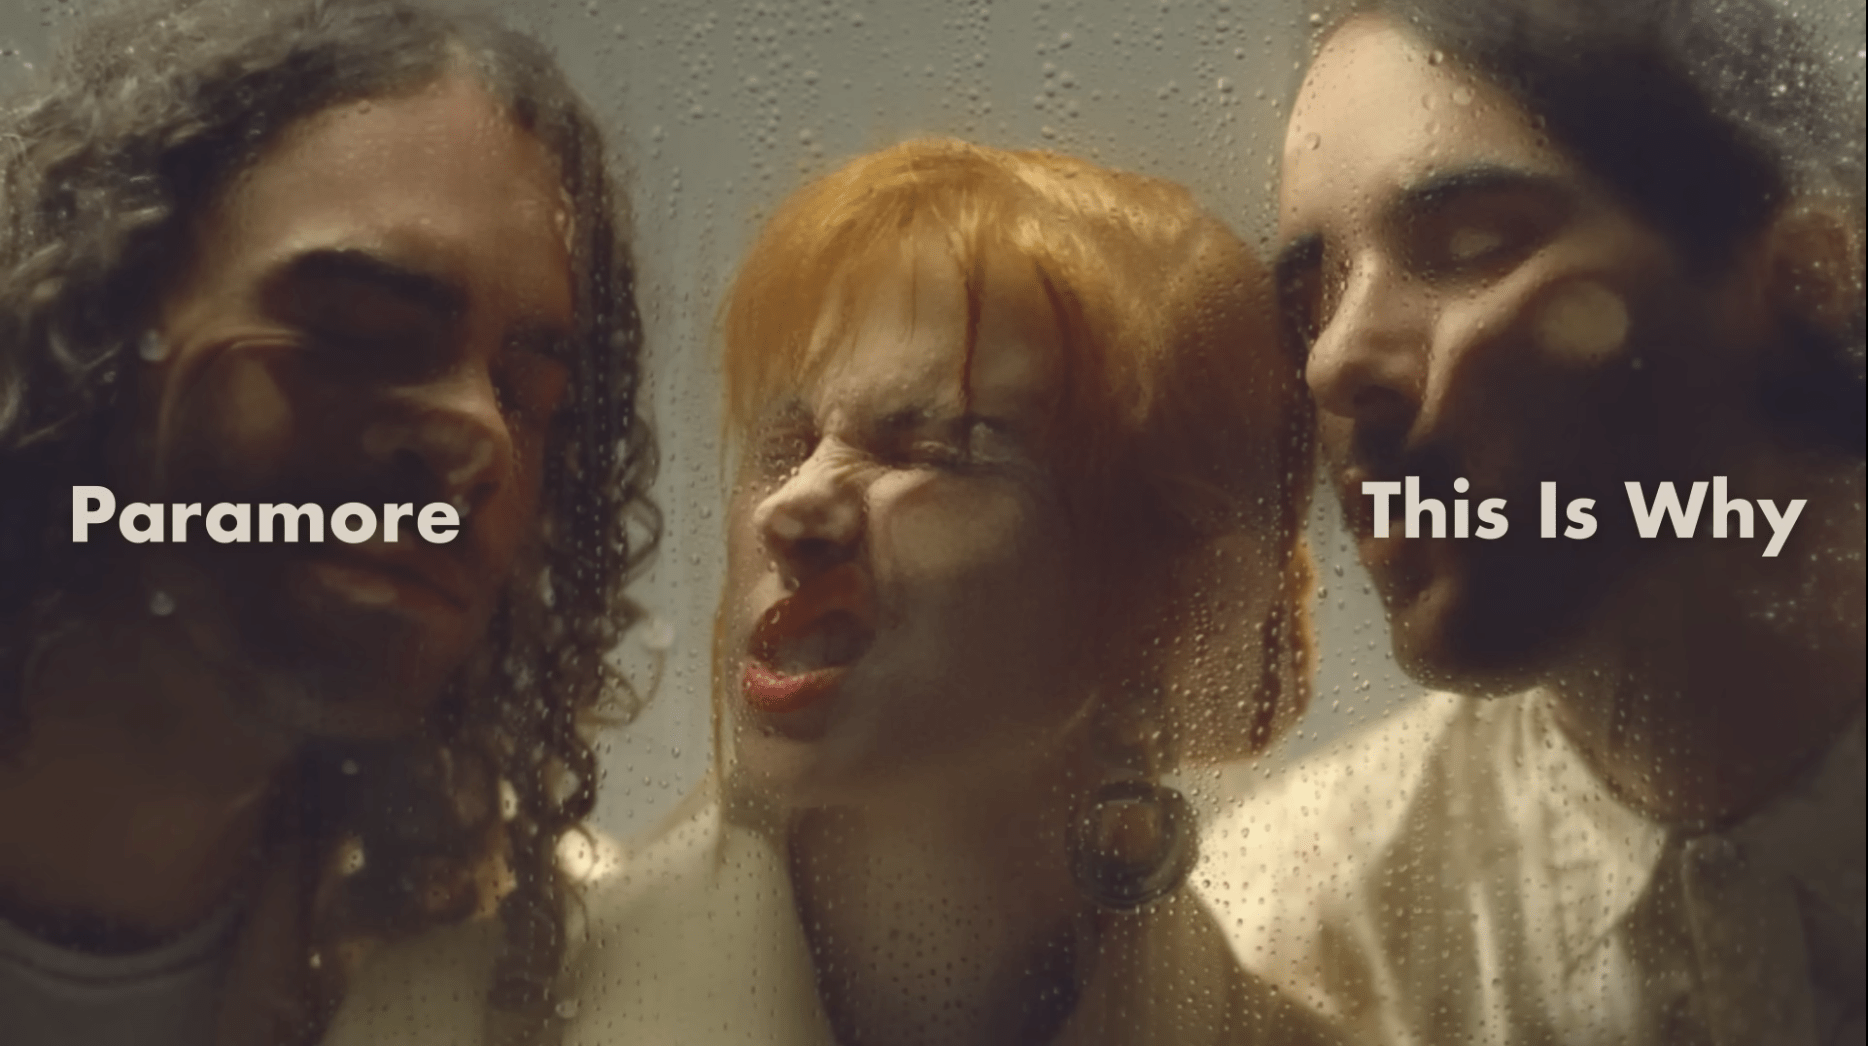 Review Zone: Paramore goes ethereal with new album 'This is Why' - The  Student Life